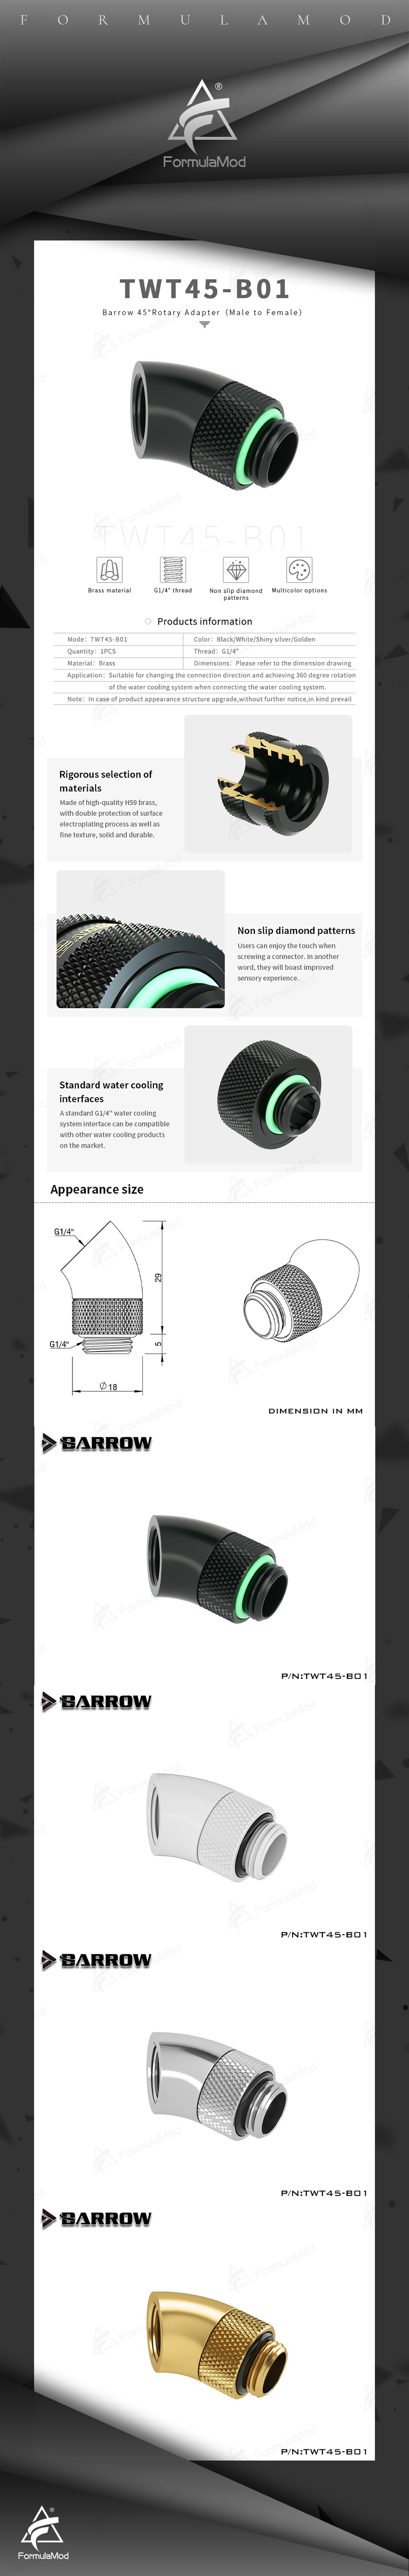 Barrow 45 Degree Fitting With Rotary, Multi-color G1/4'' Thread Adapter Rotating 45 Degrees Water Cooling Connector, TWT45-B01  